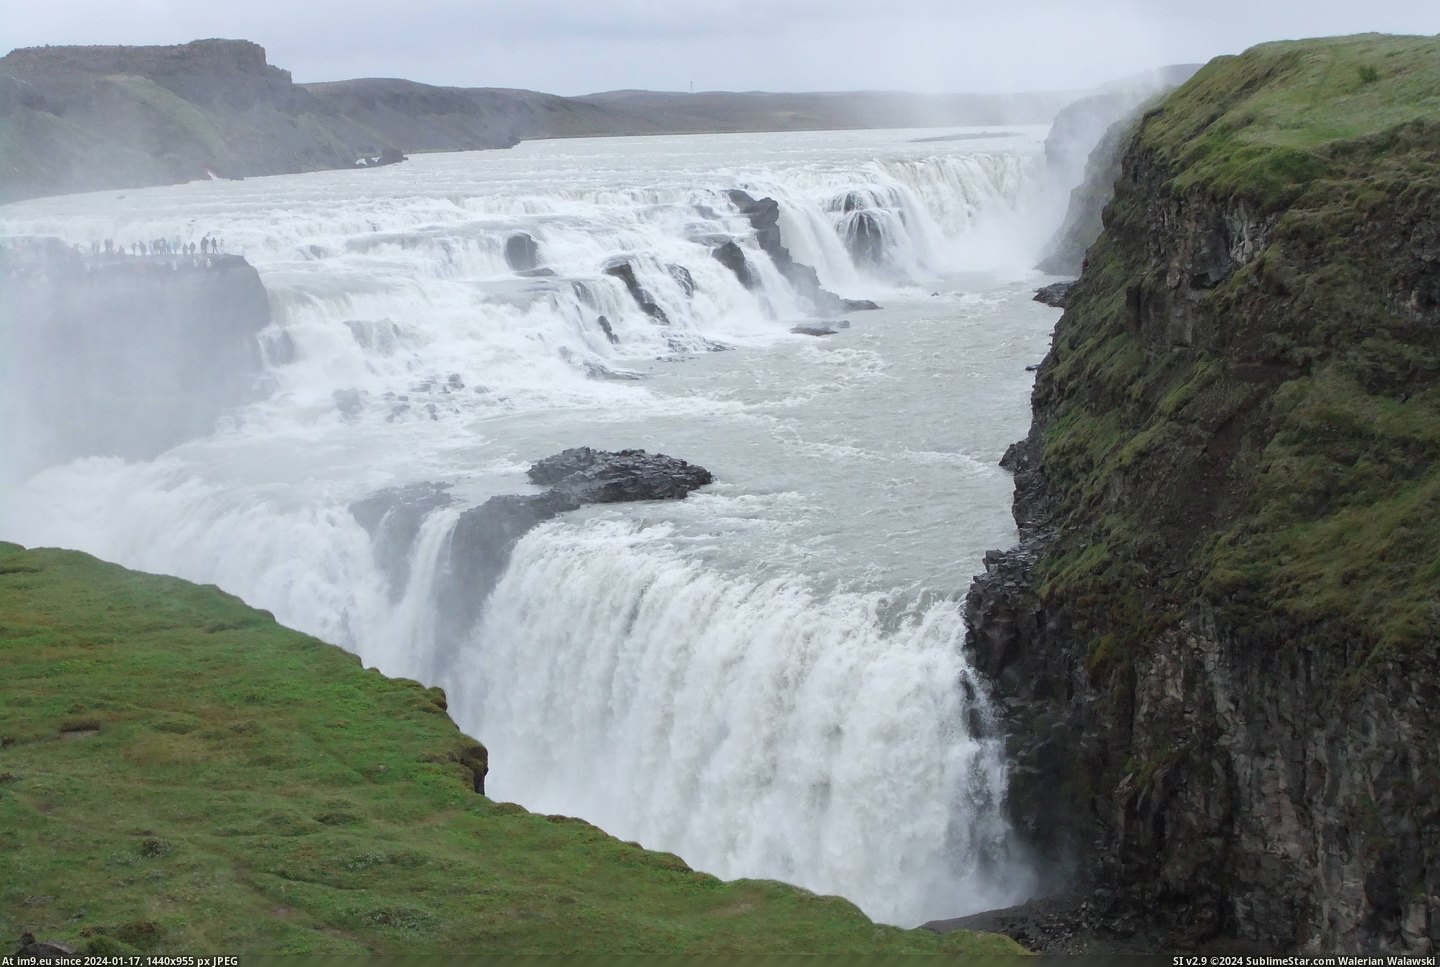 #Iceland #Gullfoss #4000x2664 #Waterfall [Earthporn] Gullfoss waterfall in Iceland [4000x2664] [OC] Pic. (Image of album My r/EARTHPORN favs))